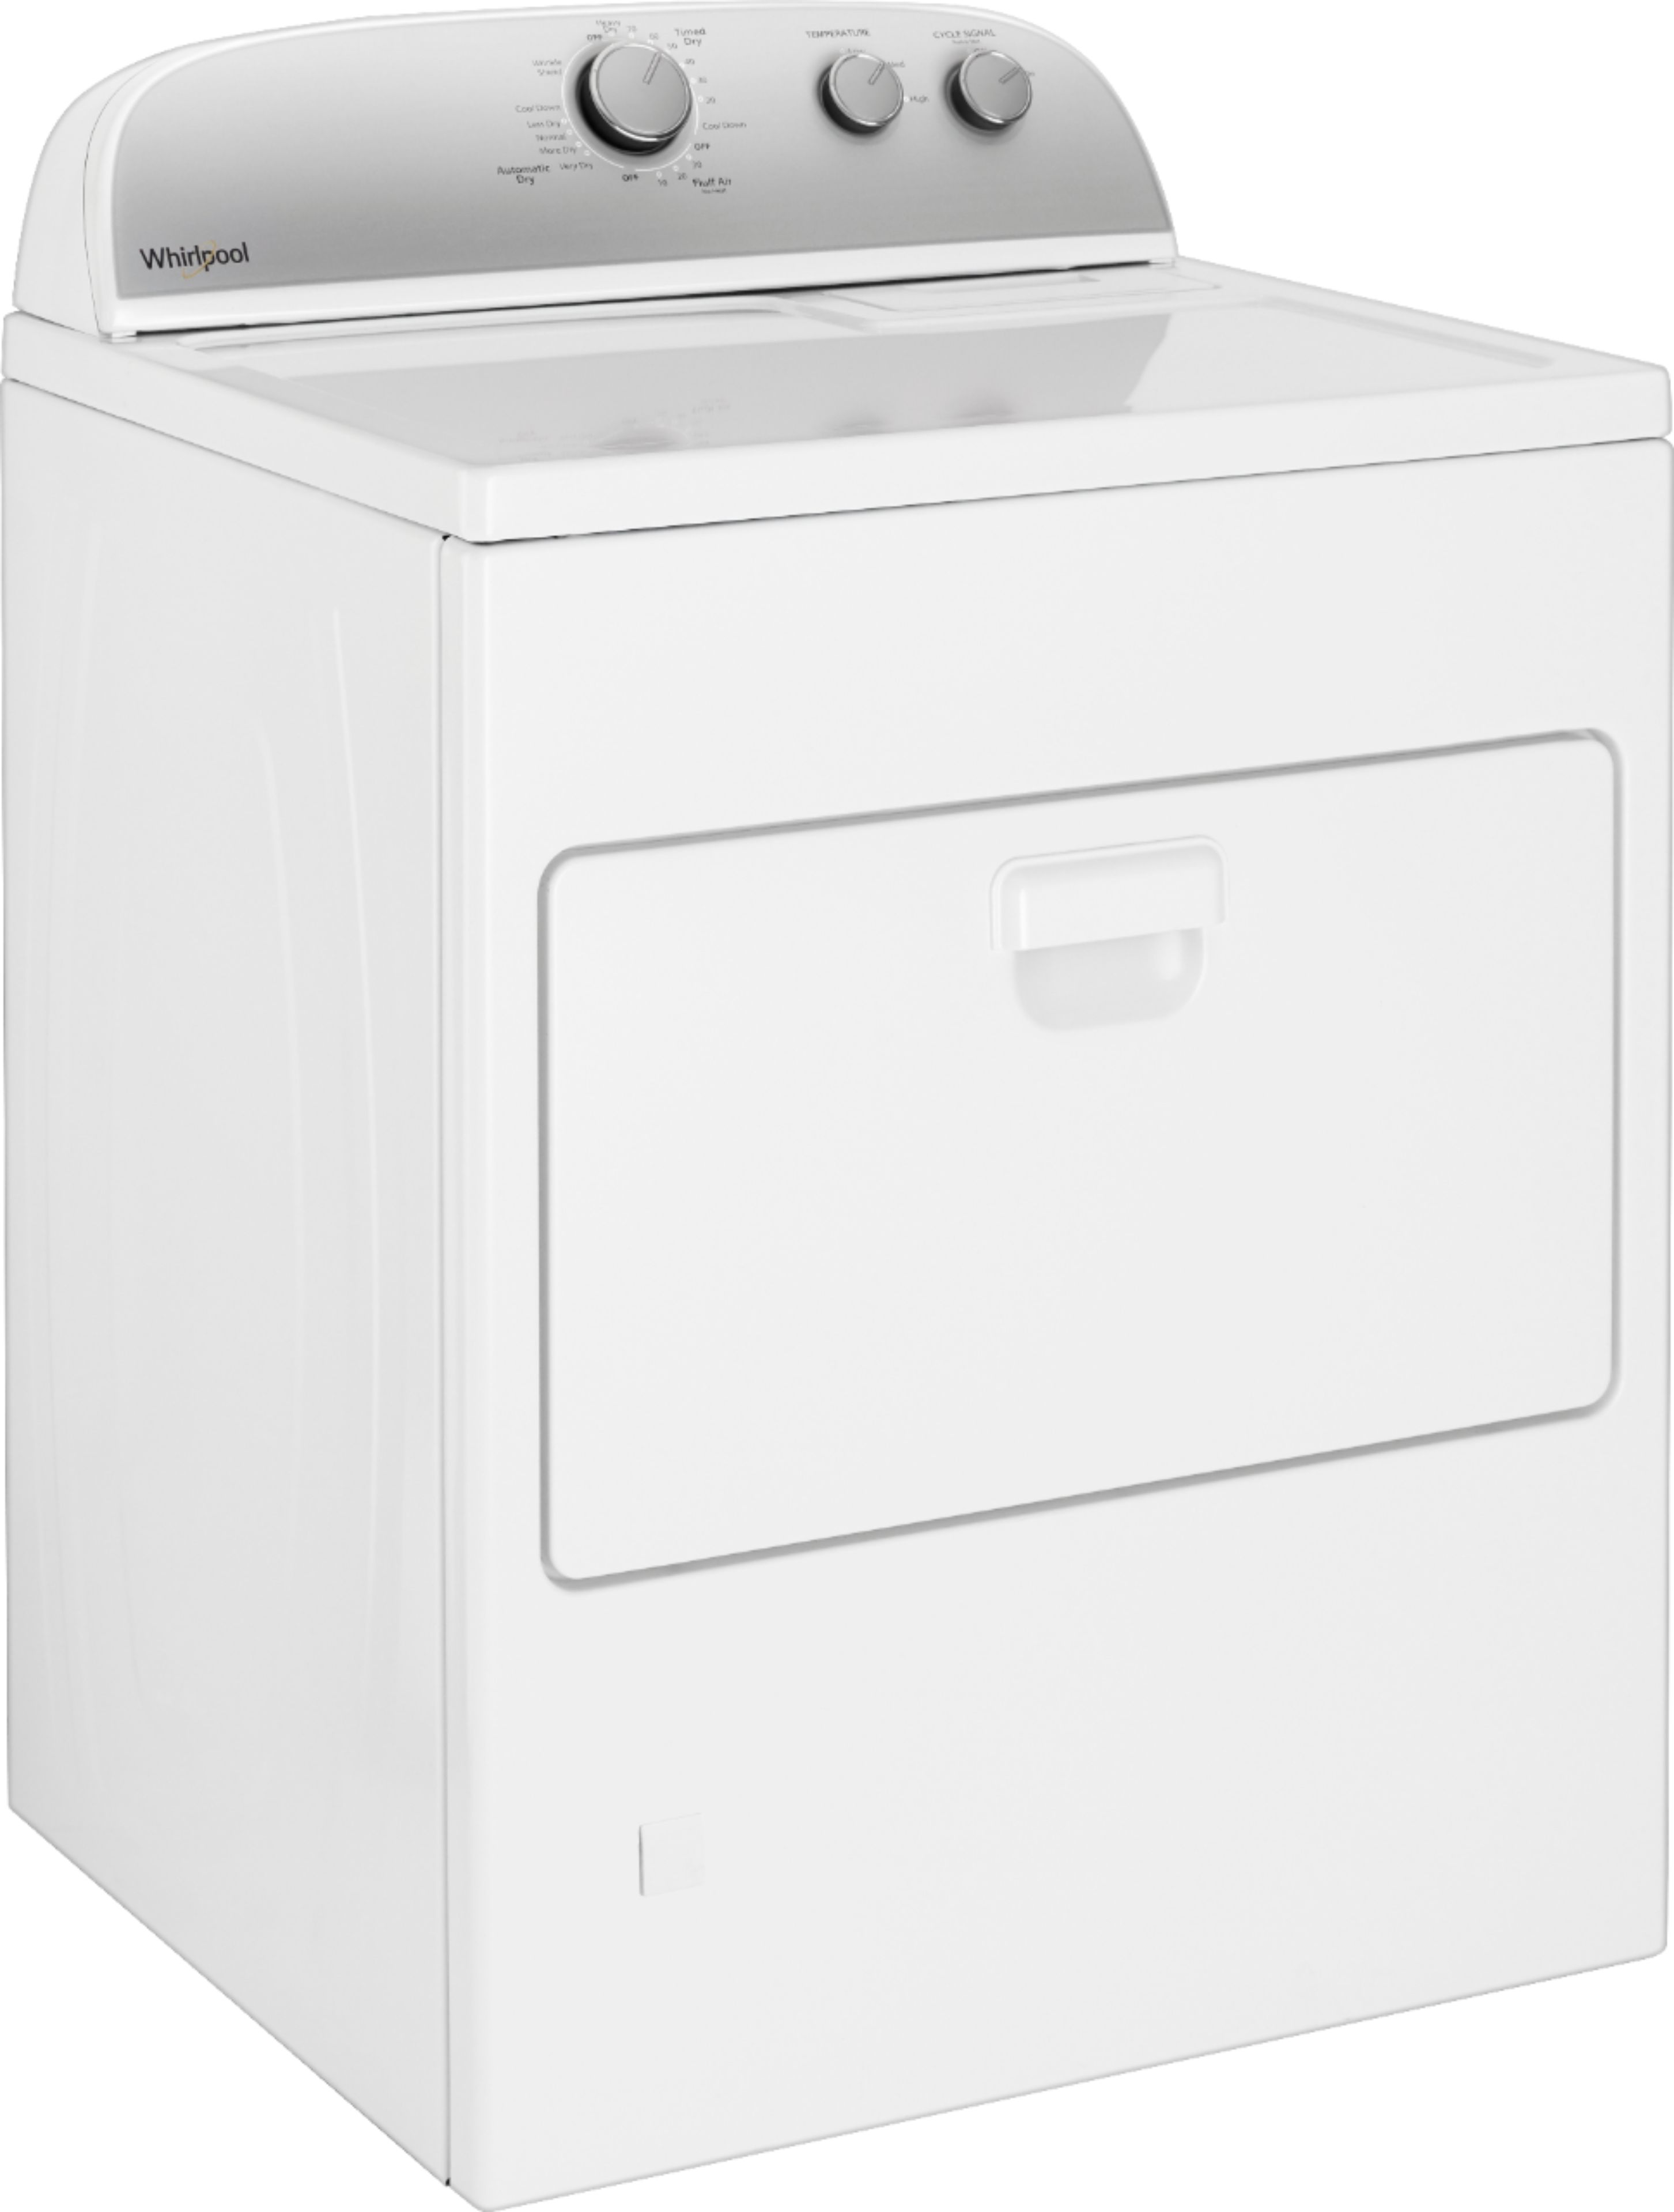 Angle View: Whirlpool - 6.7 Cu. Ft. Gas Dryer with Porcelain-Enamel Top - White